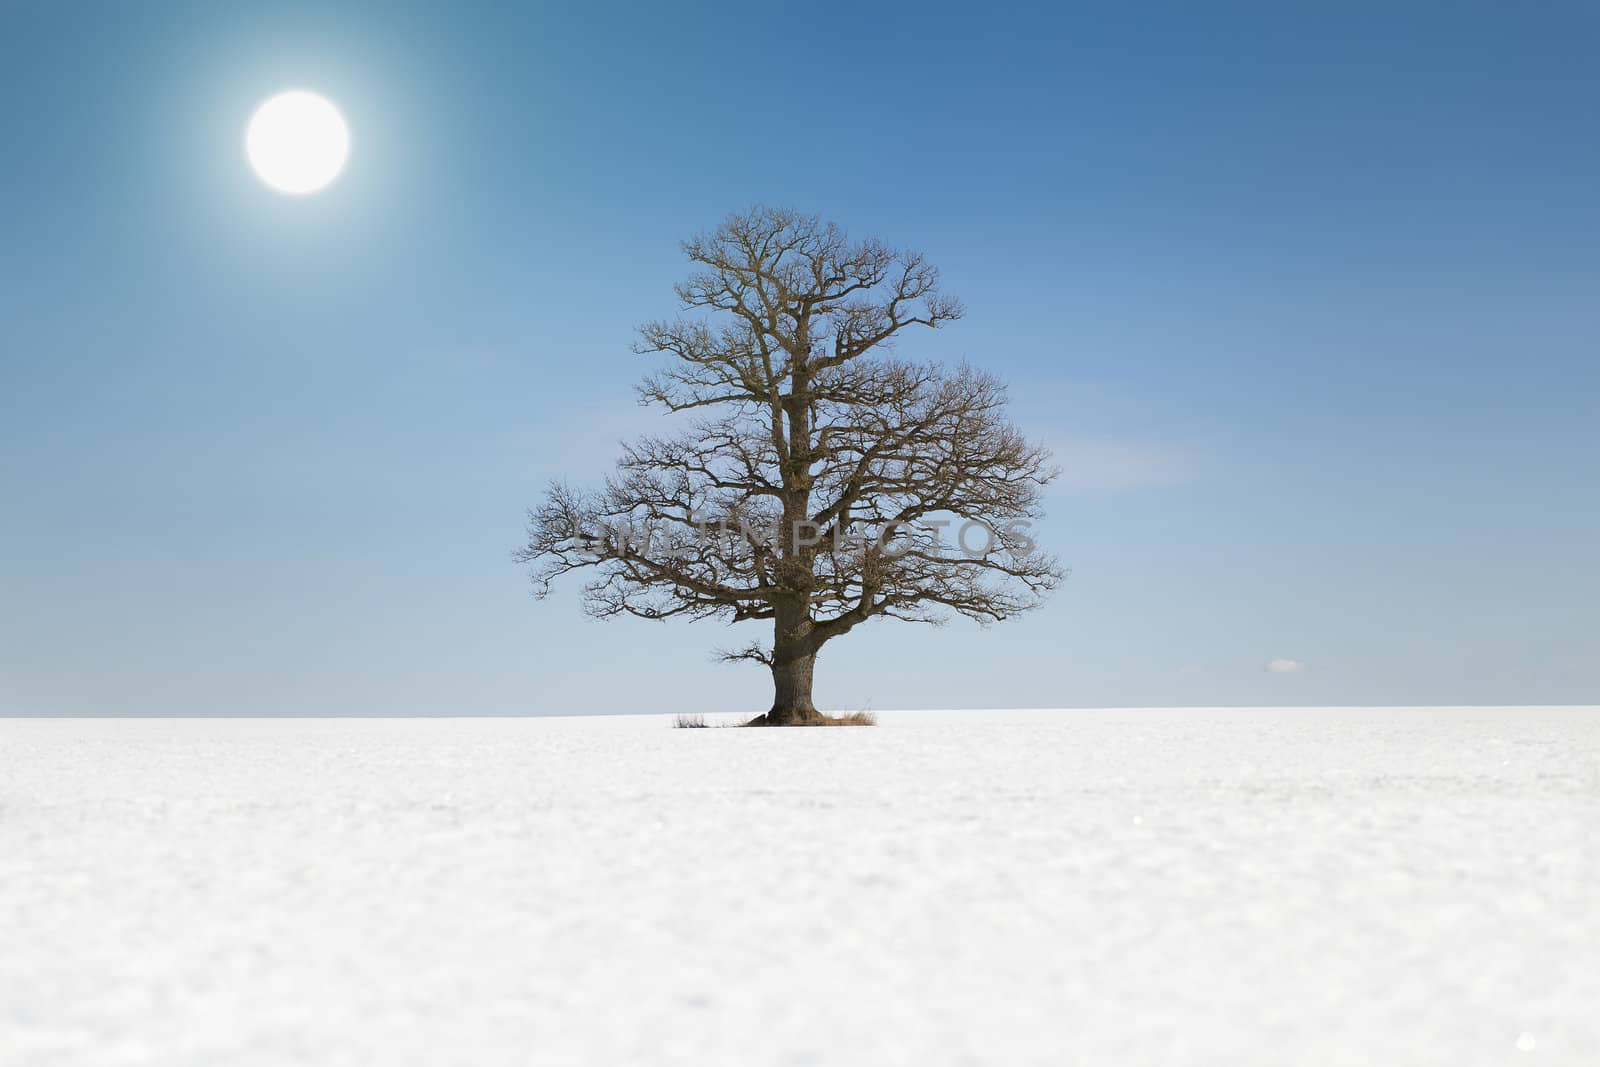 Old tree on snowy field with a sun on a blue sky background